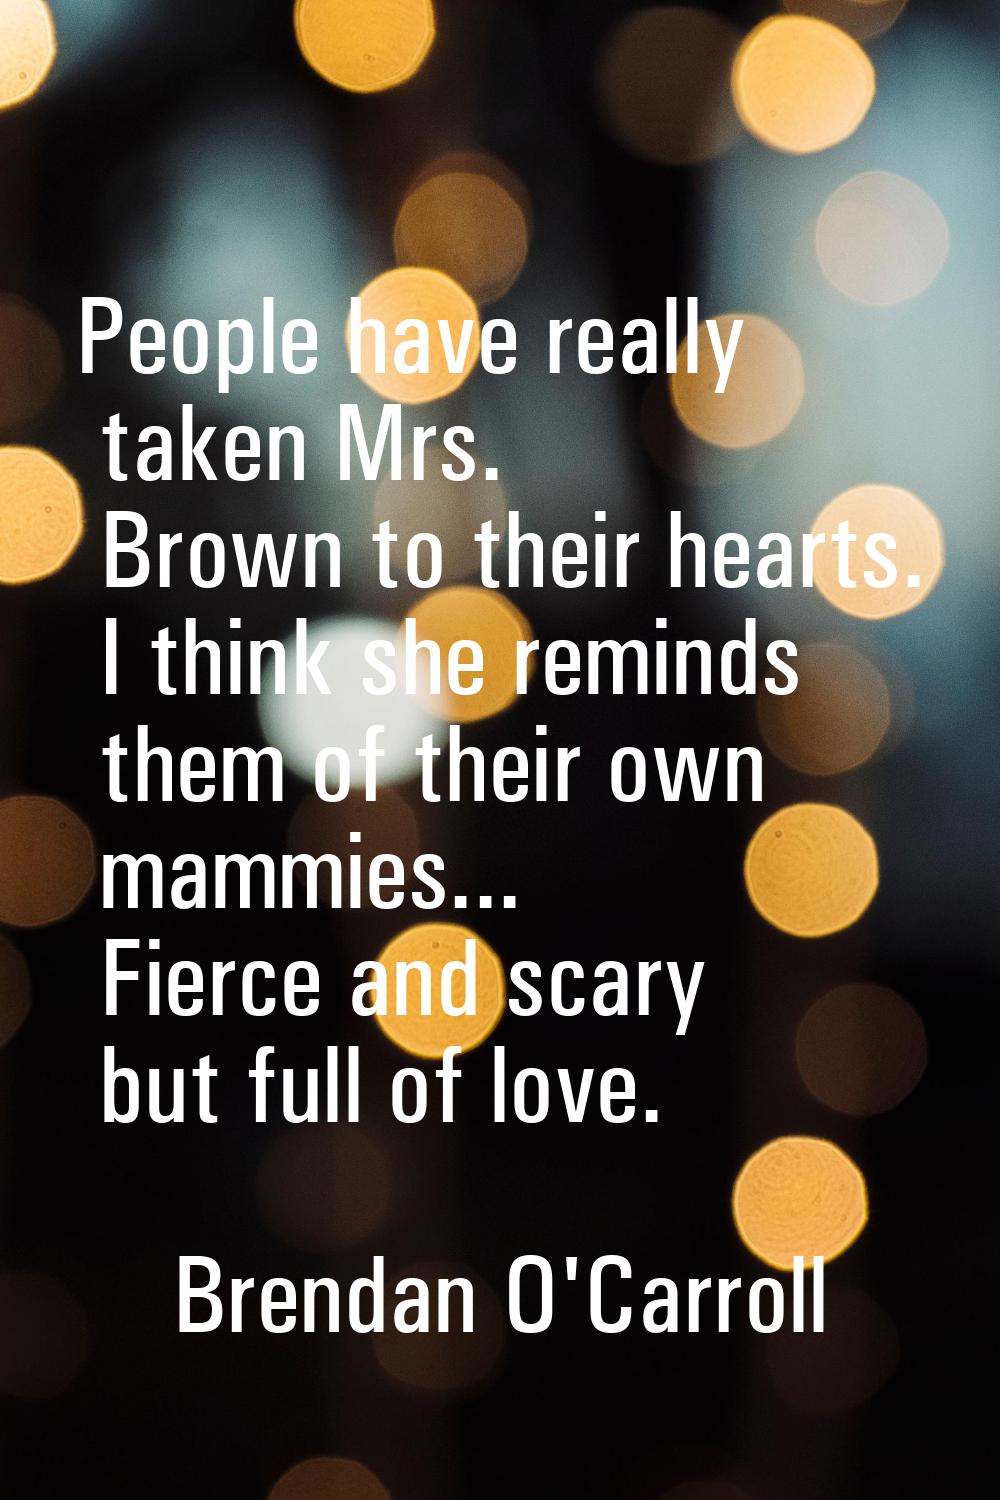 People have really taken Mrs. Brown to their hearts. I think she reminds them of their own mammies.